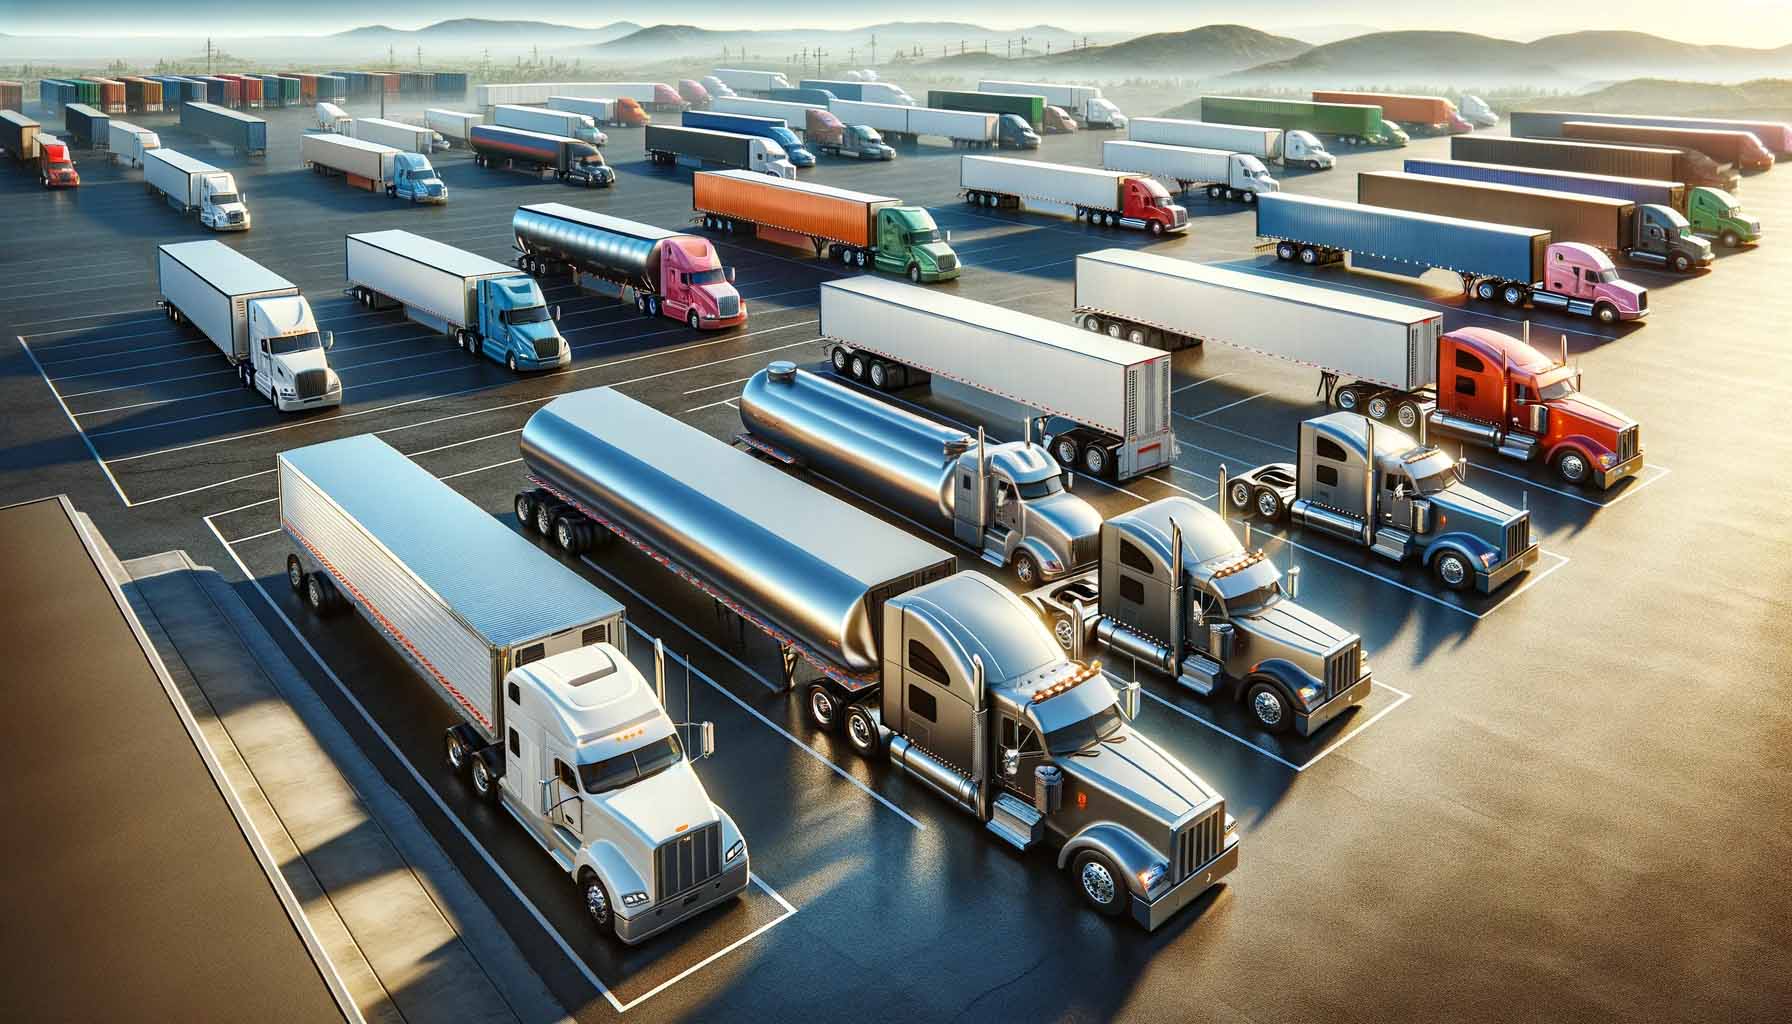 A realistic digital illustration of a variety of semi-truck trailers, showcasing different types like flatbed, reefer, tanker, lowboy, and double drop